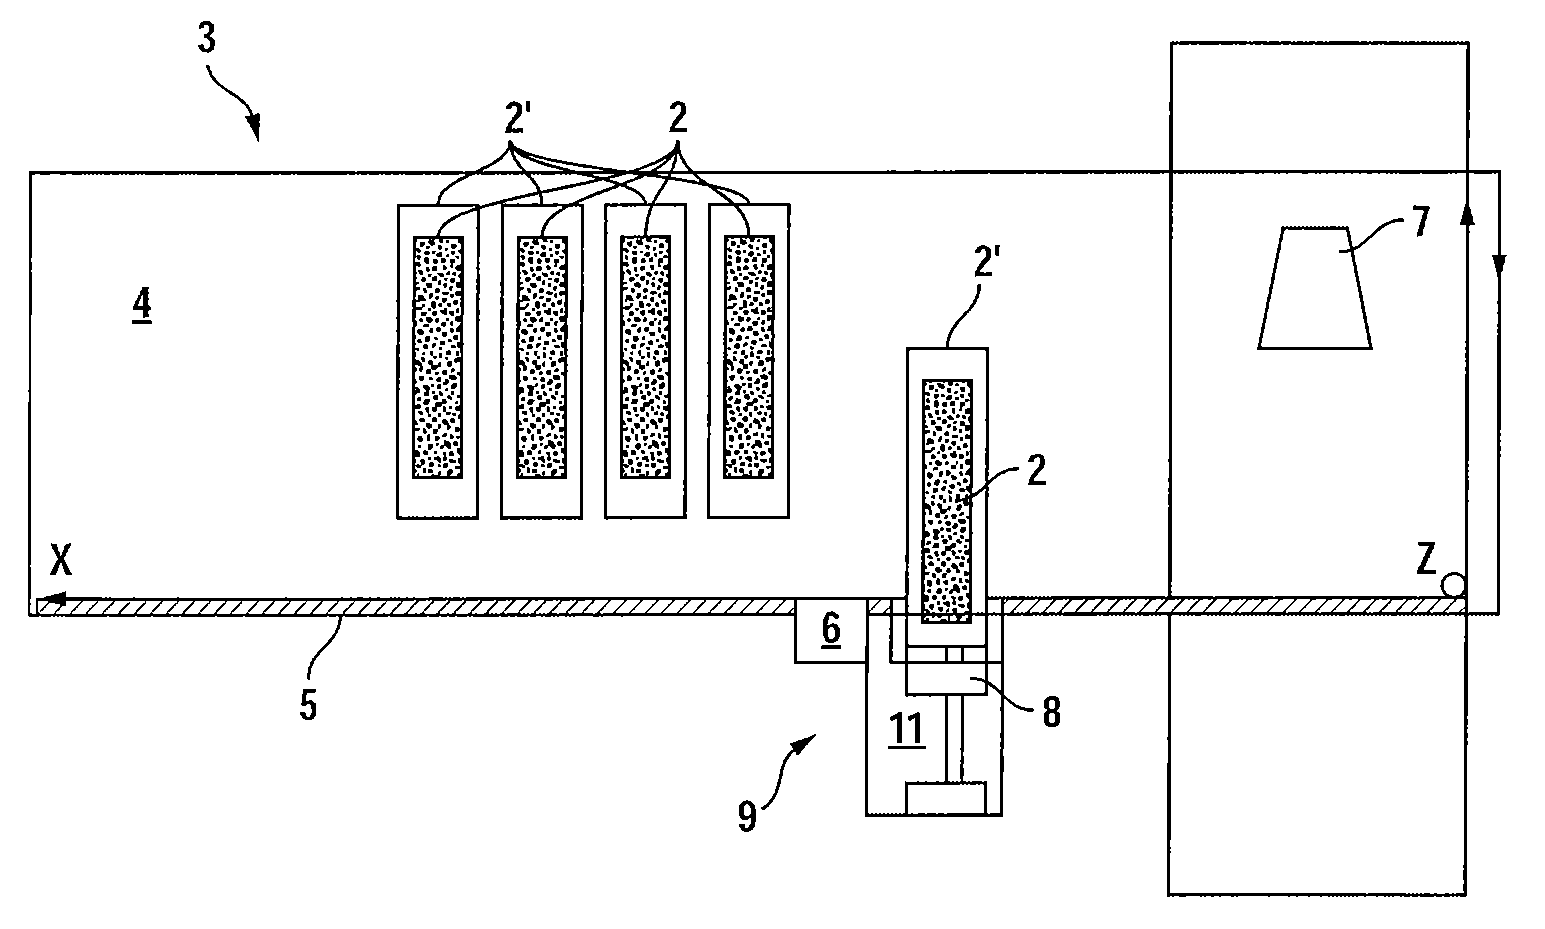 Apparatus for high throughput sequencing of nucleic acids